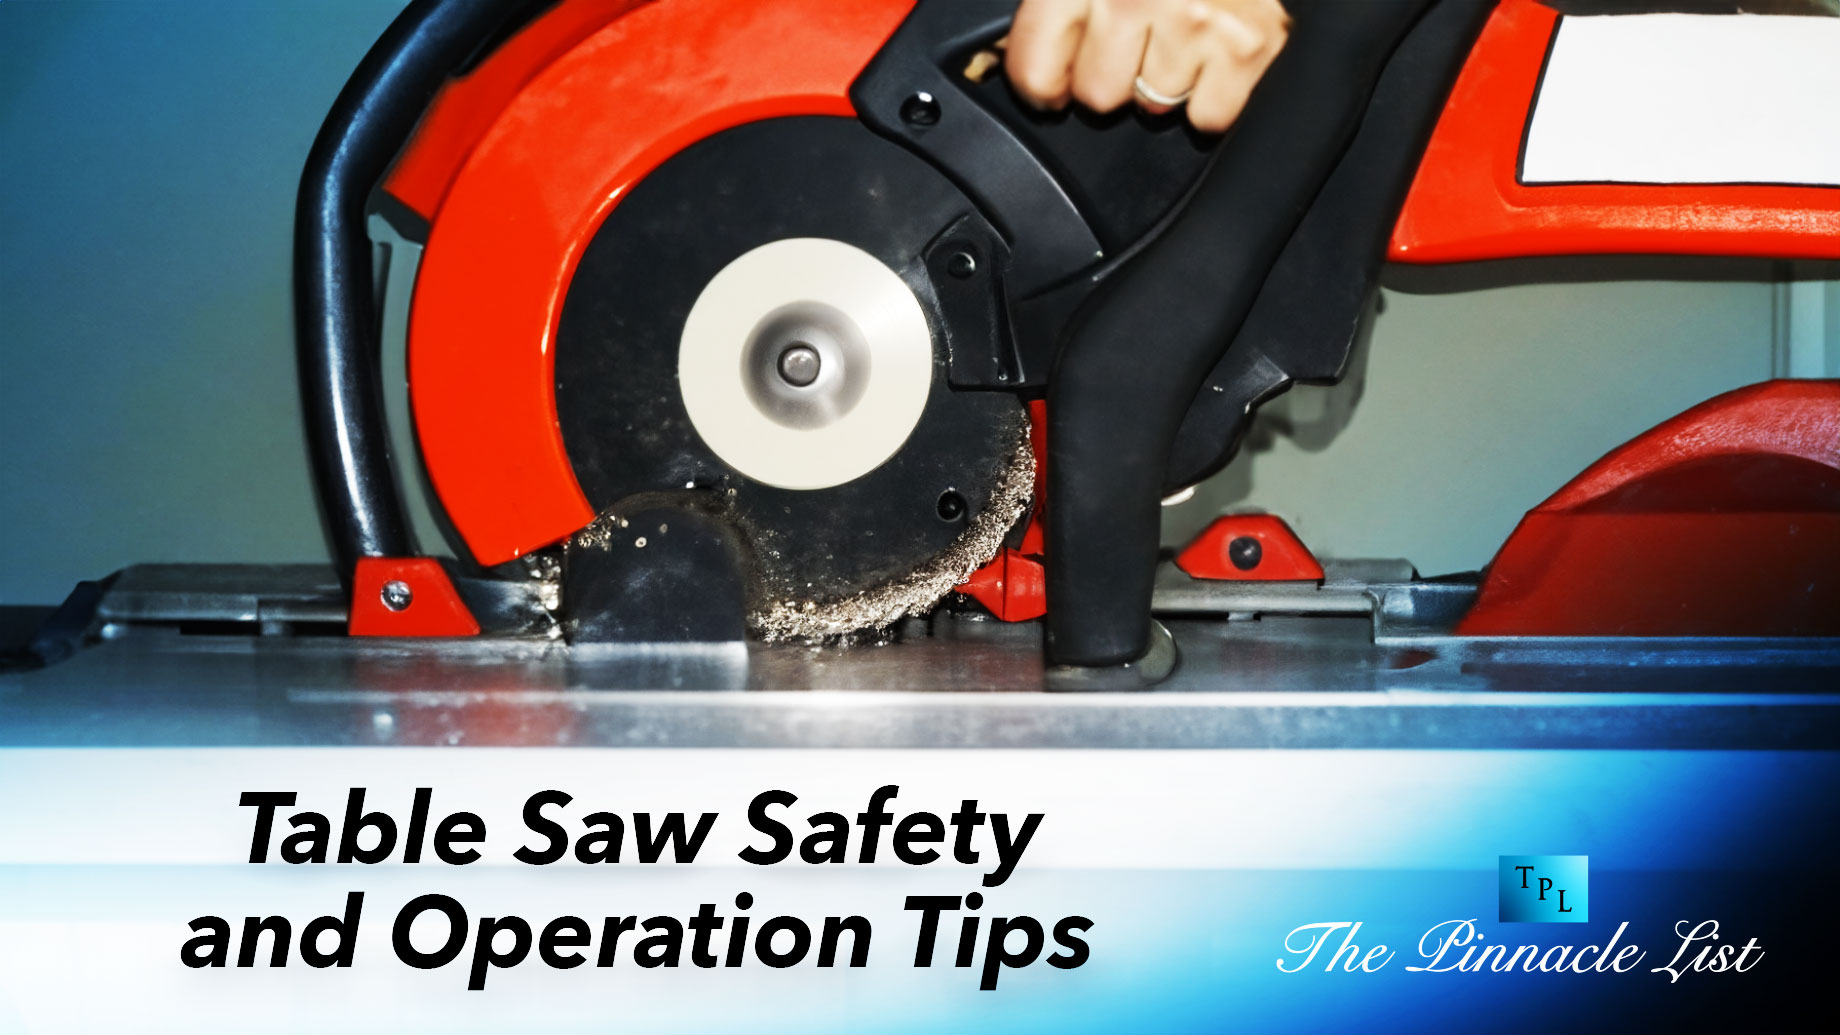 Table Saw Safety and Operation Tips